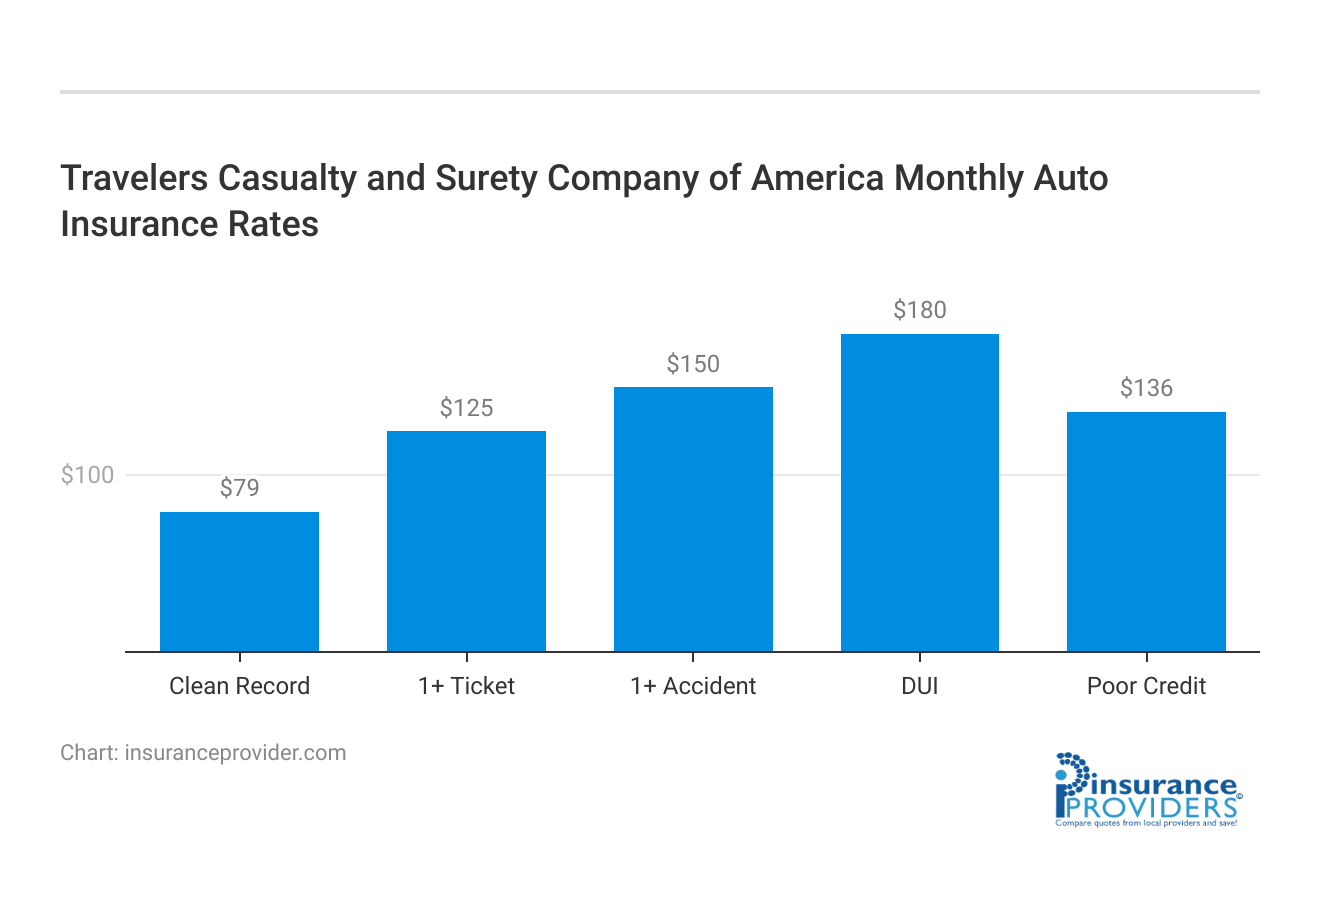 <h3>Travelers Casualty and Surety Company of America Monthly Auto Insurance Rates</h3>